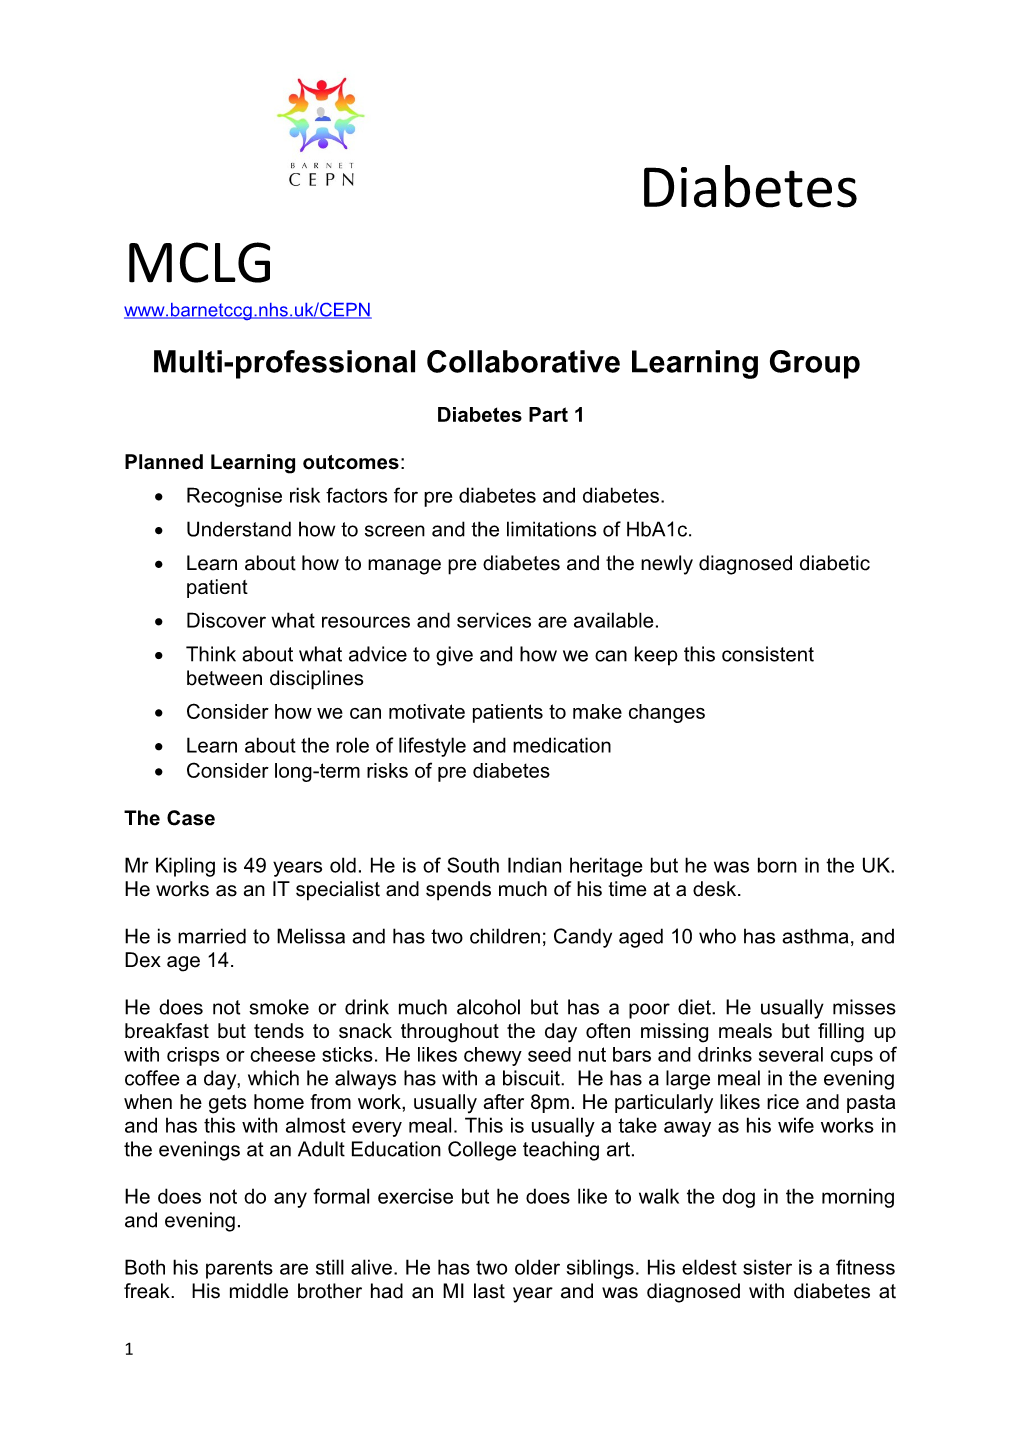 Multi-Professional Collaborative Learning Group